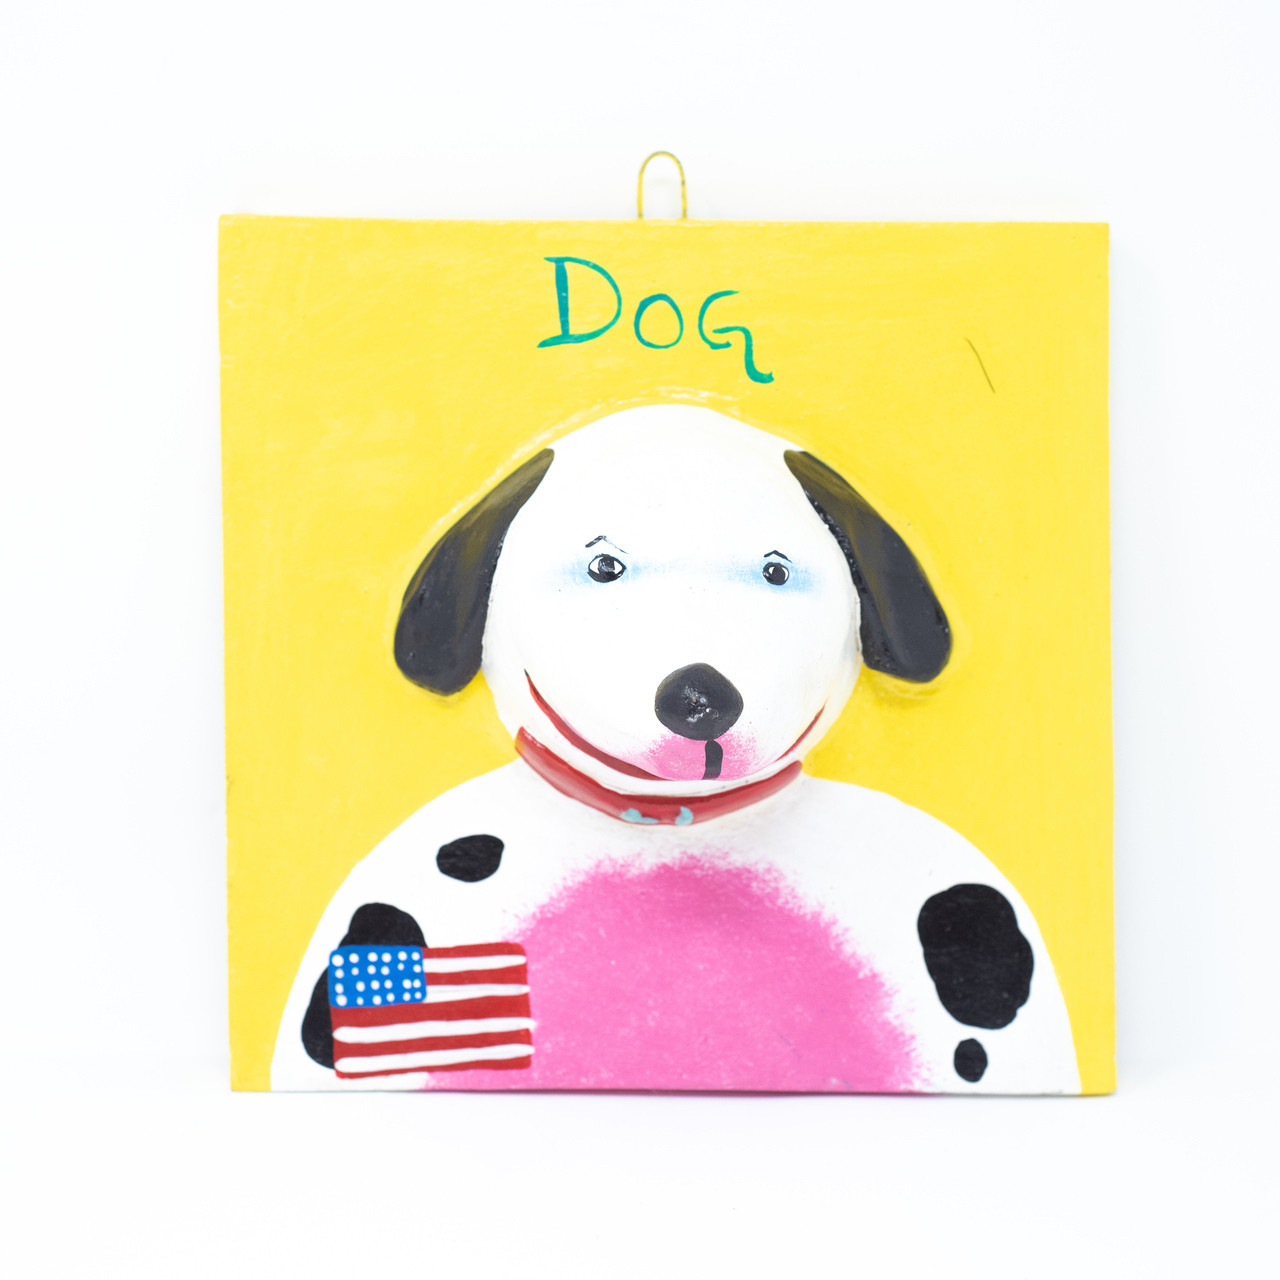 Dog, United States of America, USA, Dalmation, Plaque, One-of-a-Kind, Limited Edition, Sustainable, Recycle, Recyclable